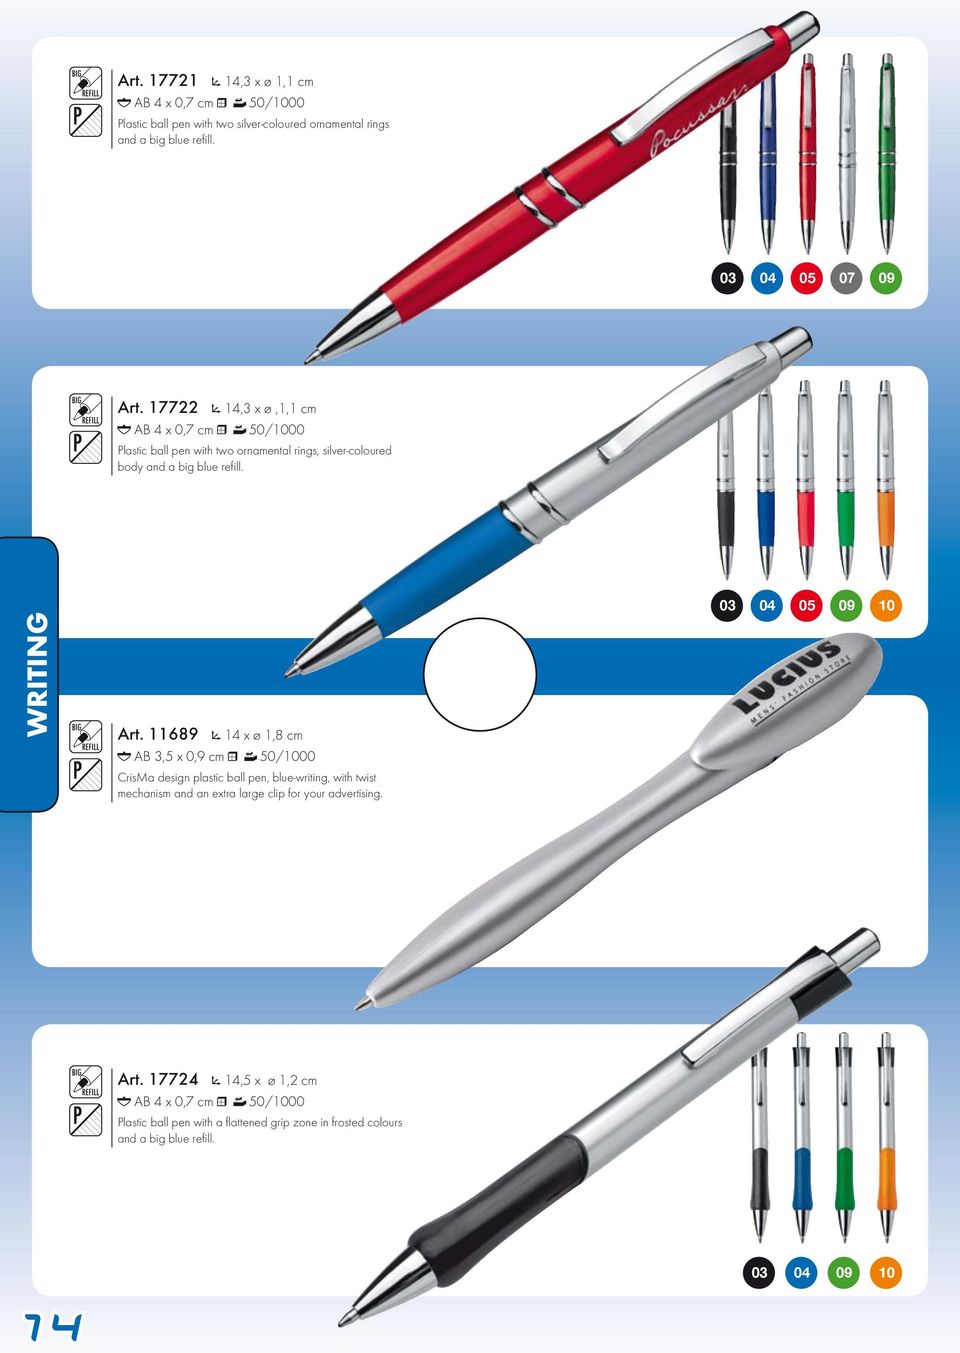 11689 14 x ø 1,8 cm AB 3,5 x 0,9 cm 50/1000 CrisMa design plastic ball pen, blue-writing, with twist mechanism and an extra large clip for your